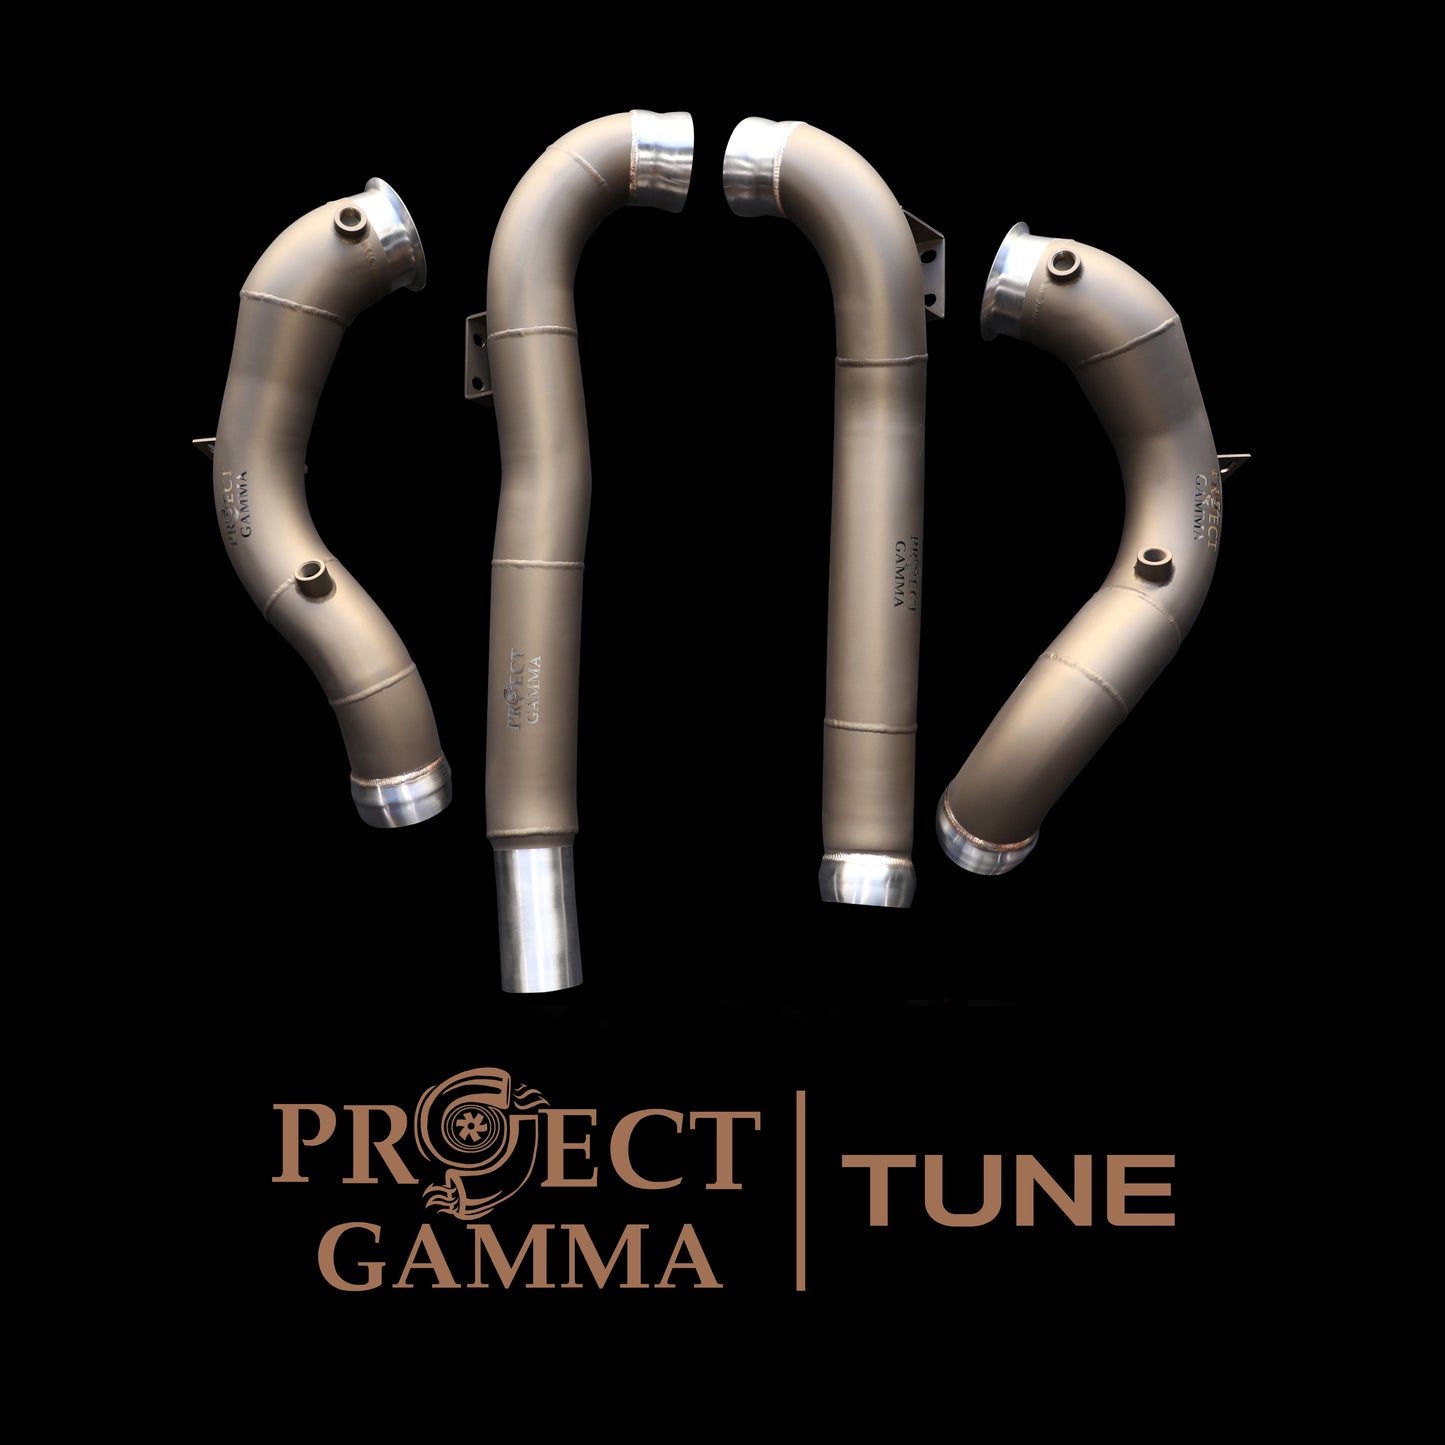 Project Gamma Mercedes-Benz GT | GTS Downpipes and Project Gamma Tune Package WTGTSC